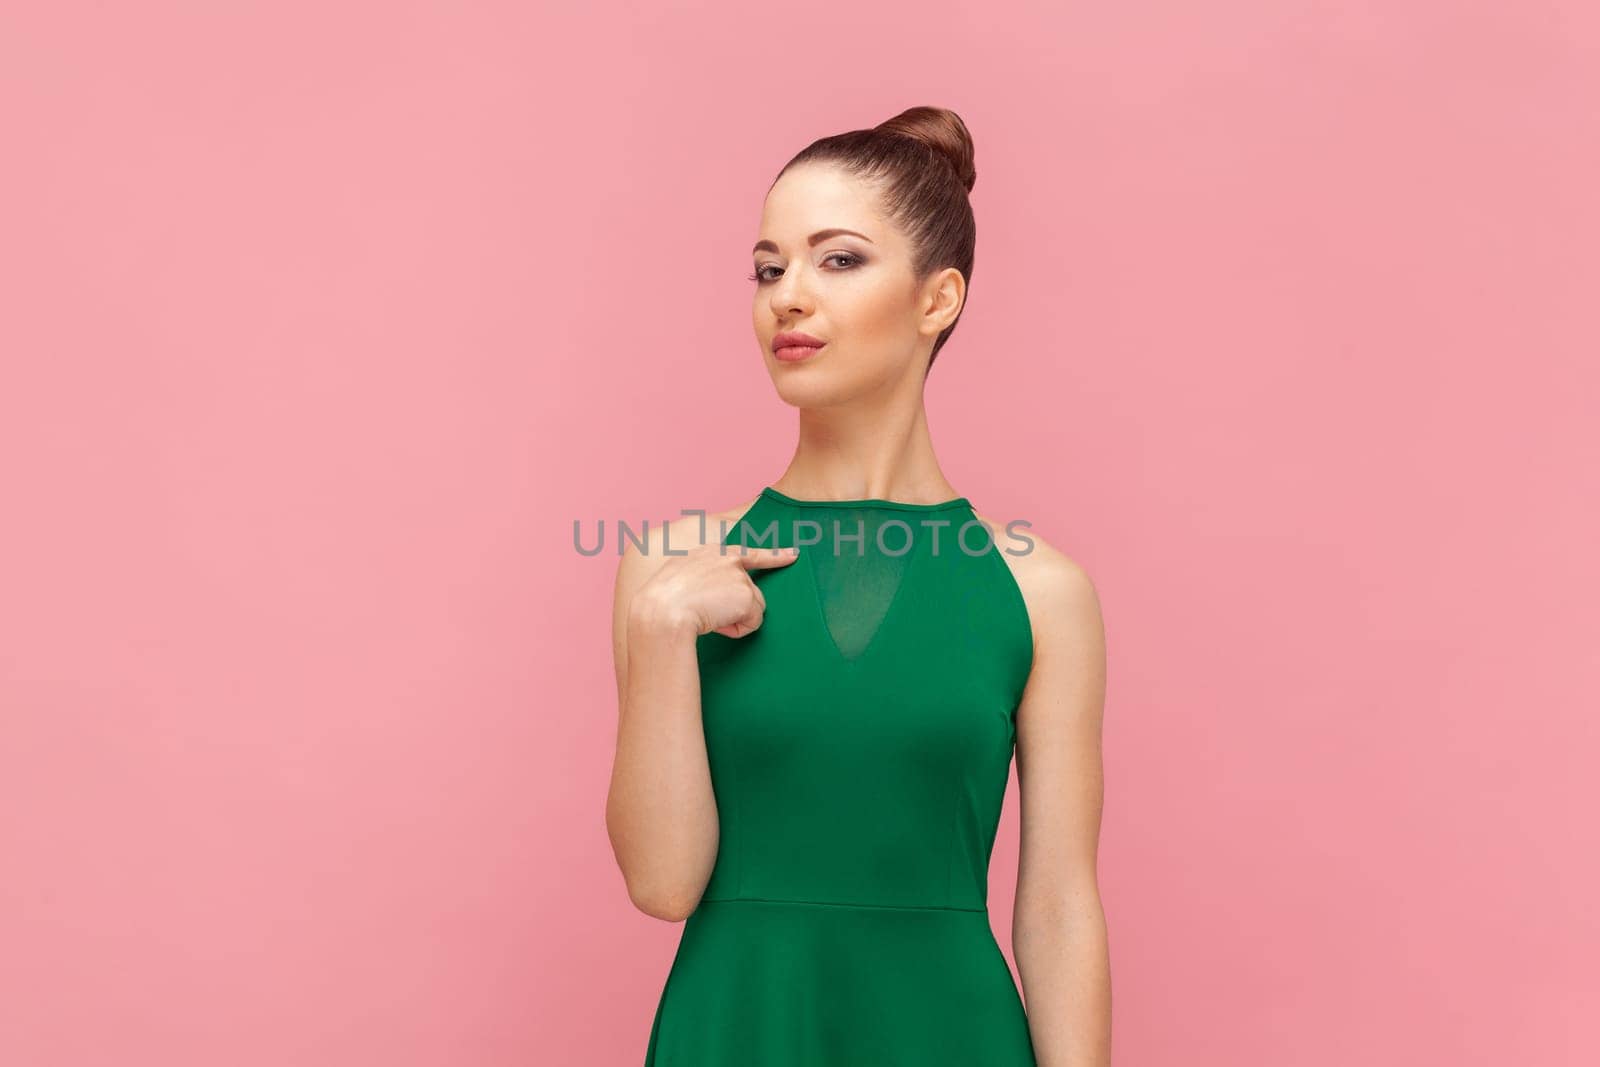 Portrait of self-confident egoistic woman with bun hairstyle standing with proud facial expression, pointing finger at herself , wearing green dress. Indoor studio shot isolated on pink background.